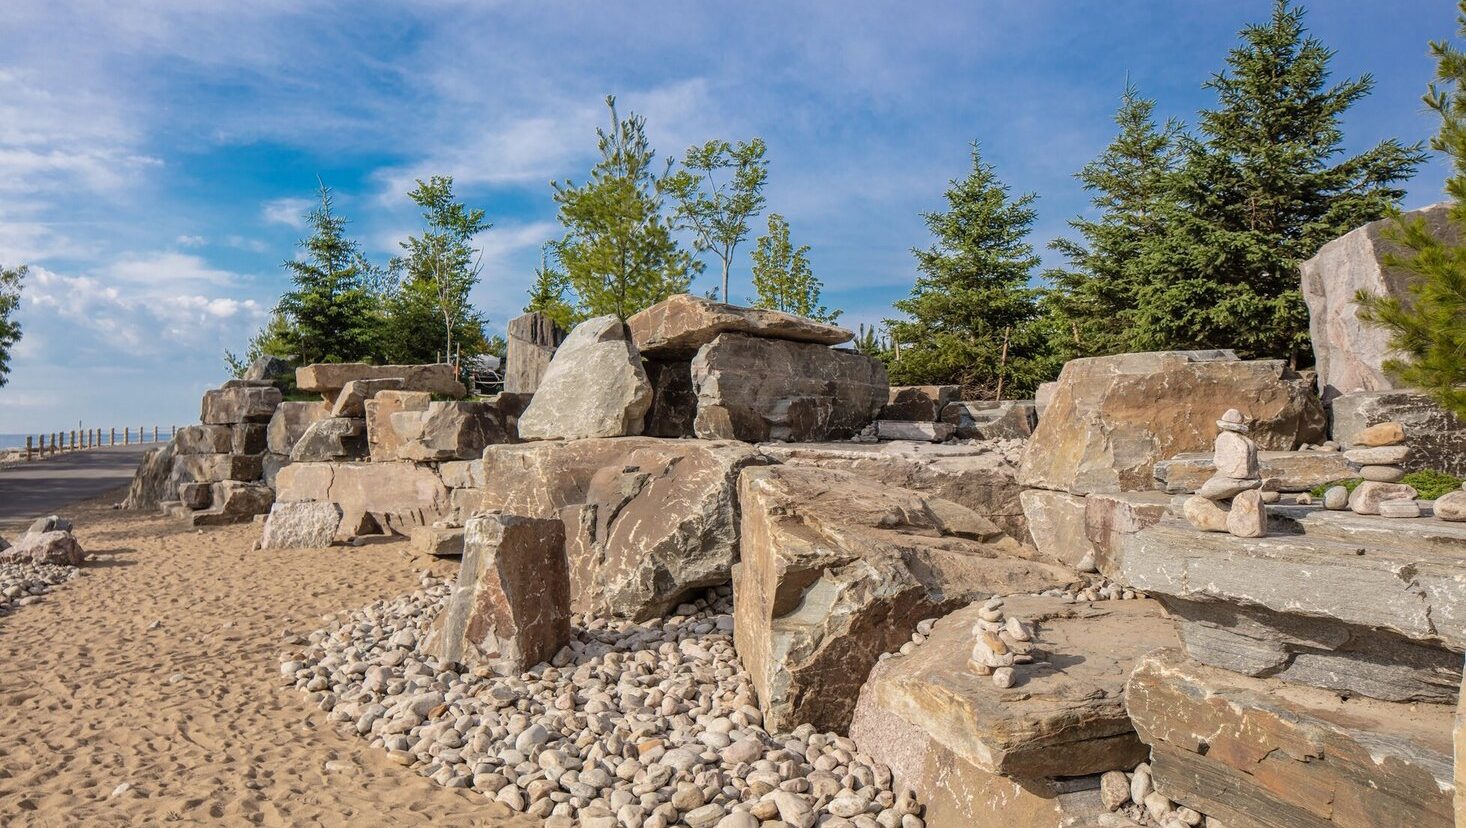 Using Fieldstones for Landmarks, Memorials and Architectural Projects